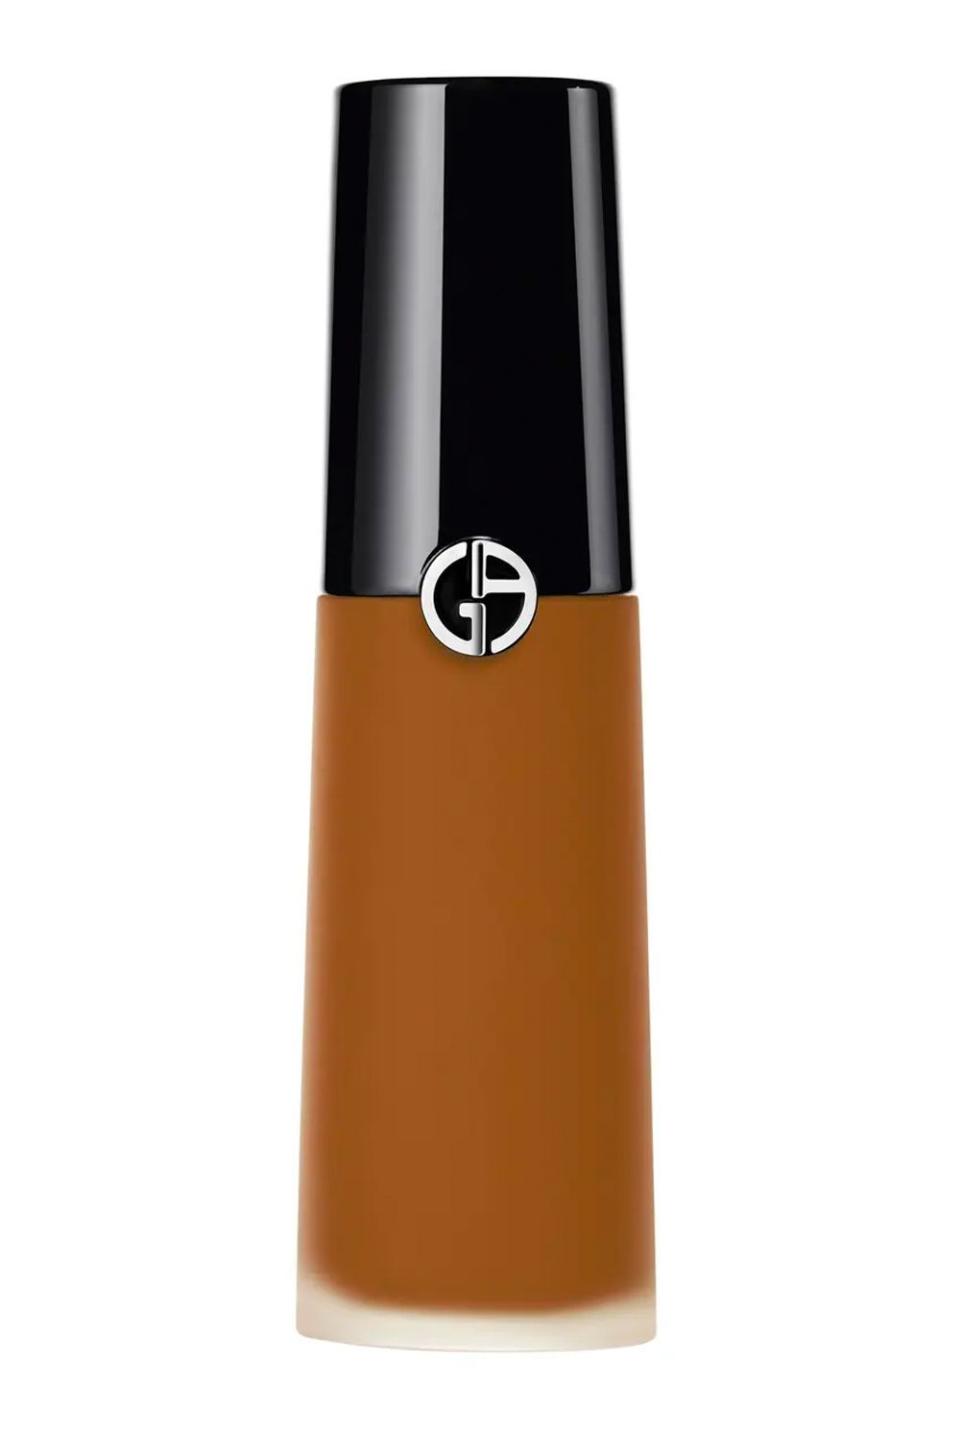 16) Armani Beauty Luminous Silk Face and Under-Eye Concealer